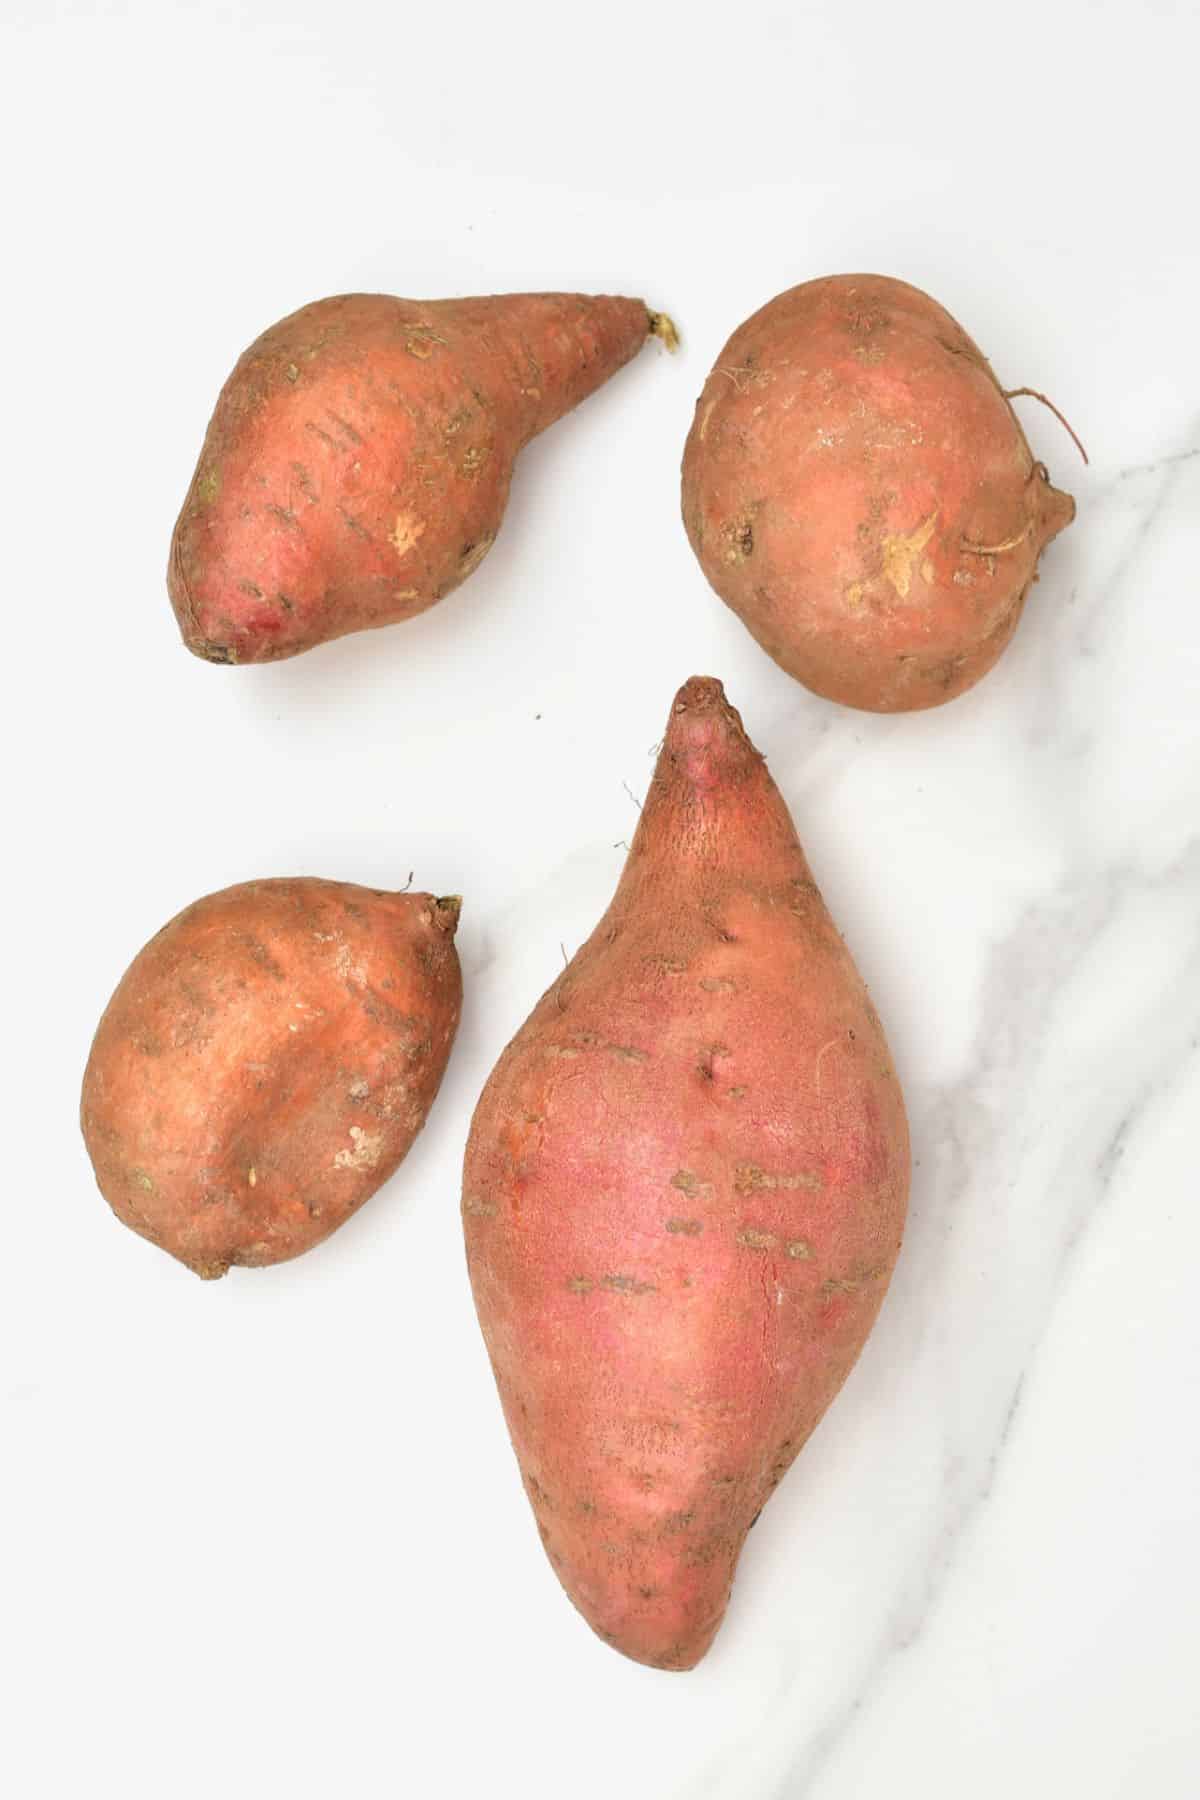 Four Sweet potatoes on a flat surface